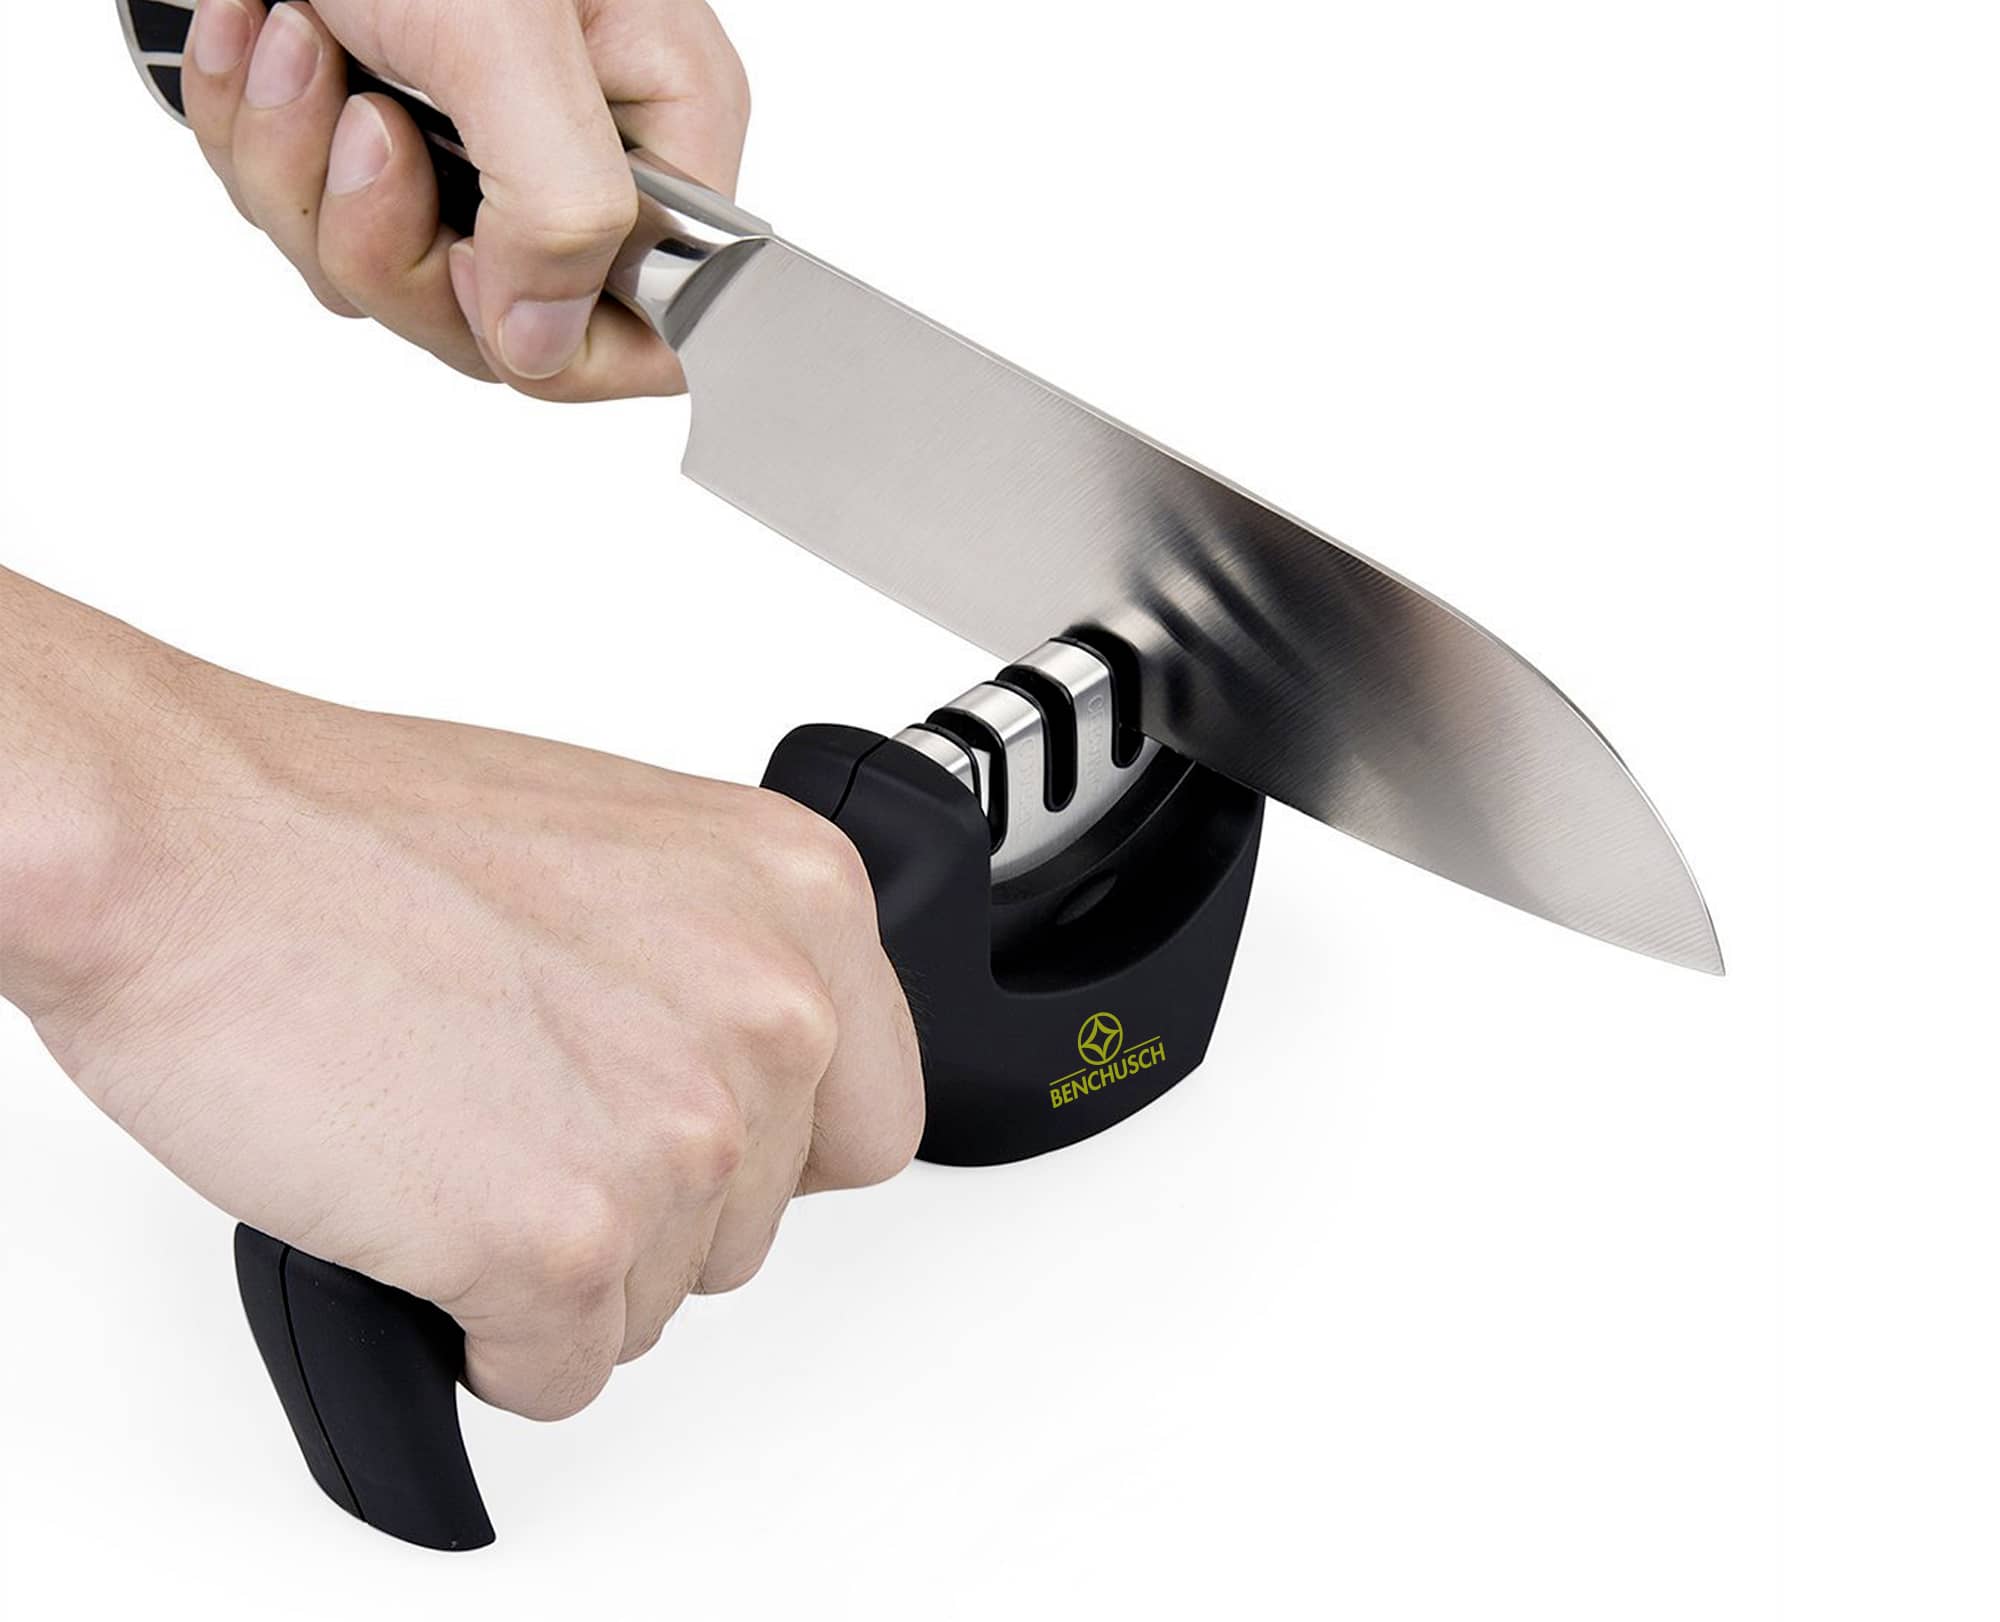 A Man sharp the knife with Benchusch Three-Stage Knife Sharpener